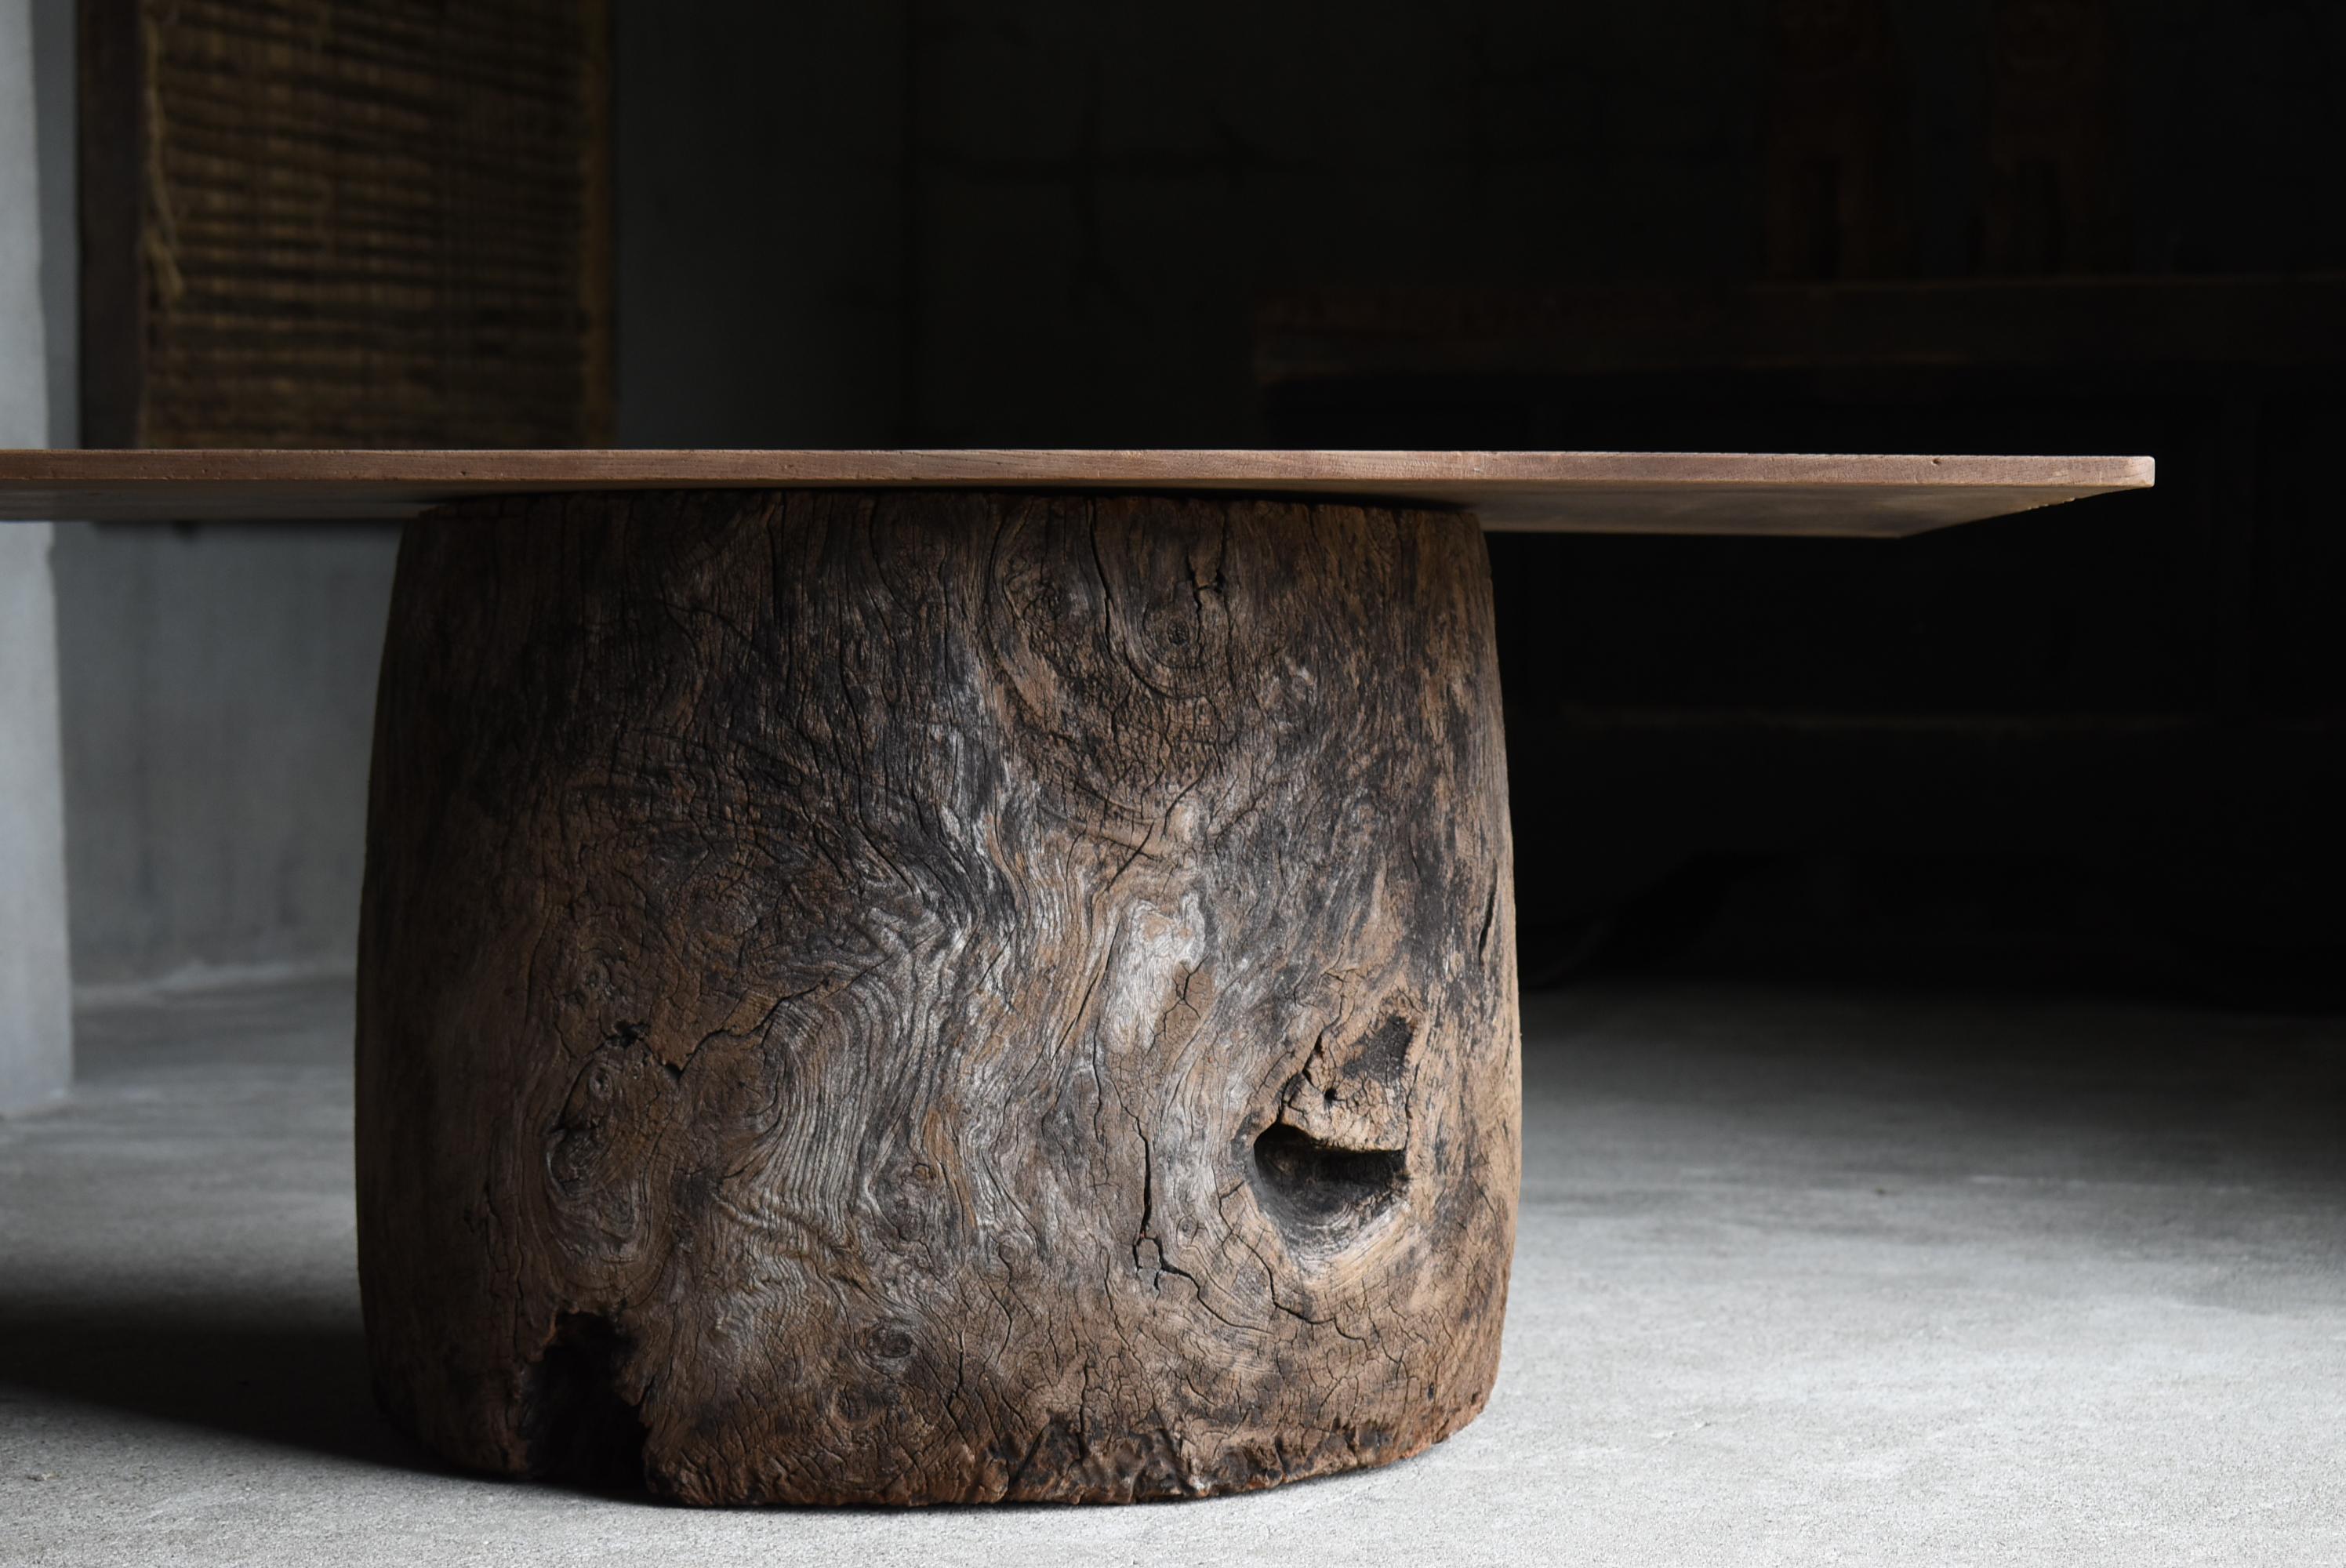 Very old Japanese primitive style coffee table.
Simple design with a single board on a stump.
The furniture dates from the Meiji period (1860s-1900s).

Both the wooden plank and the stump are made of zelkova.
Each material itself is very unique and